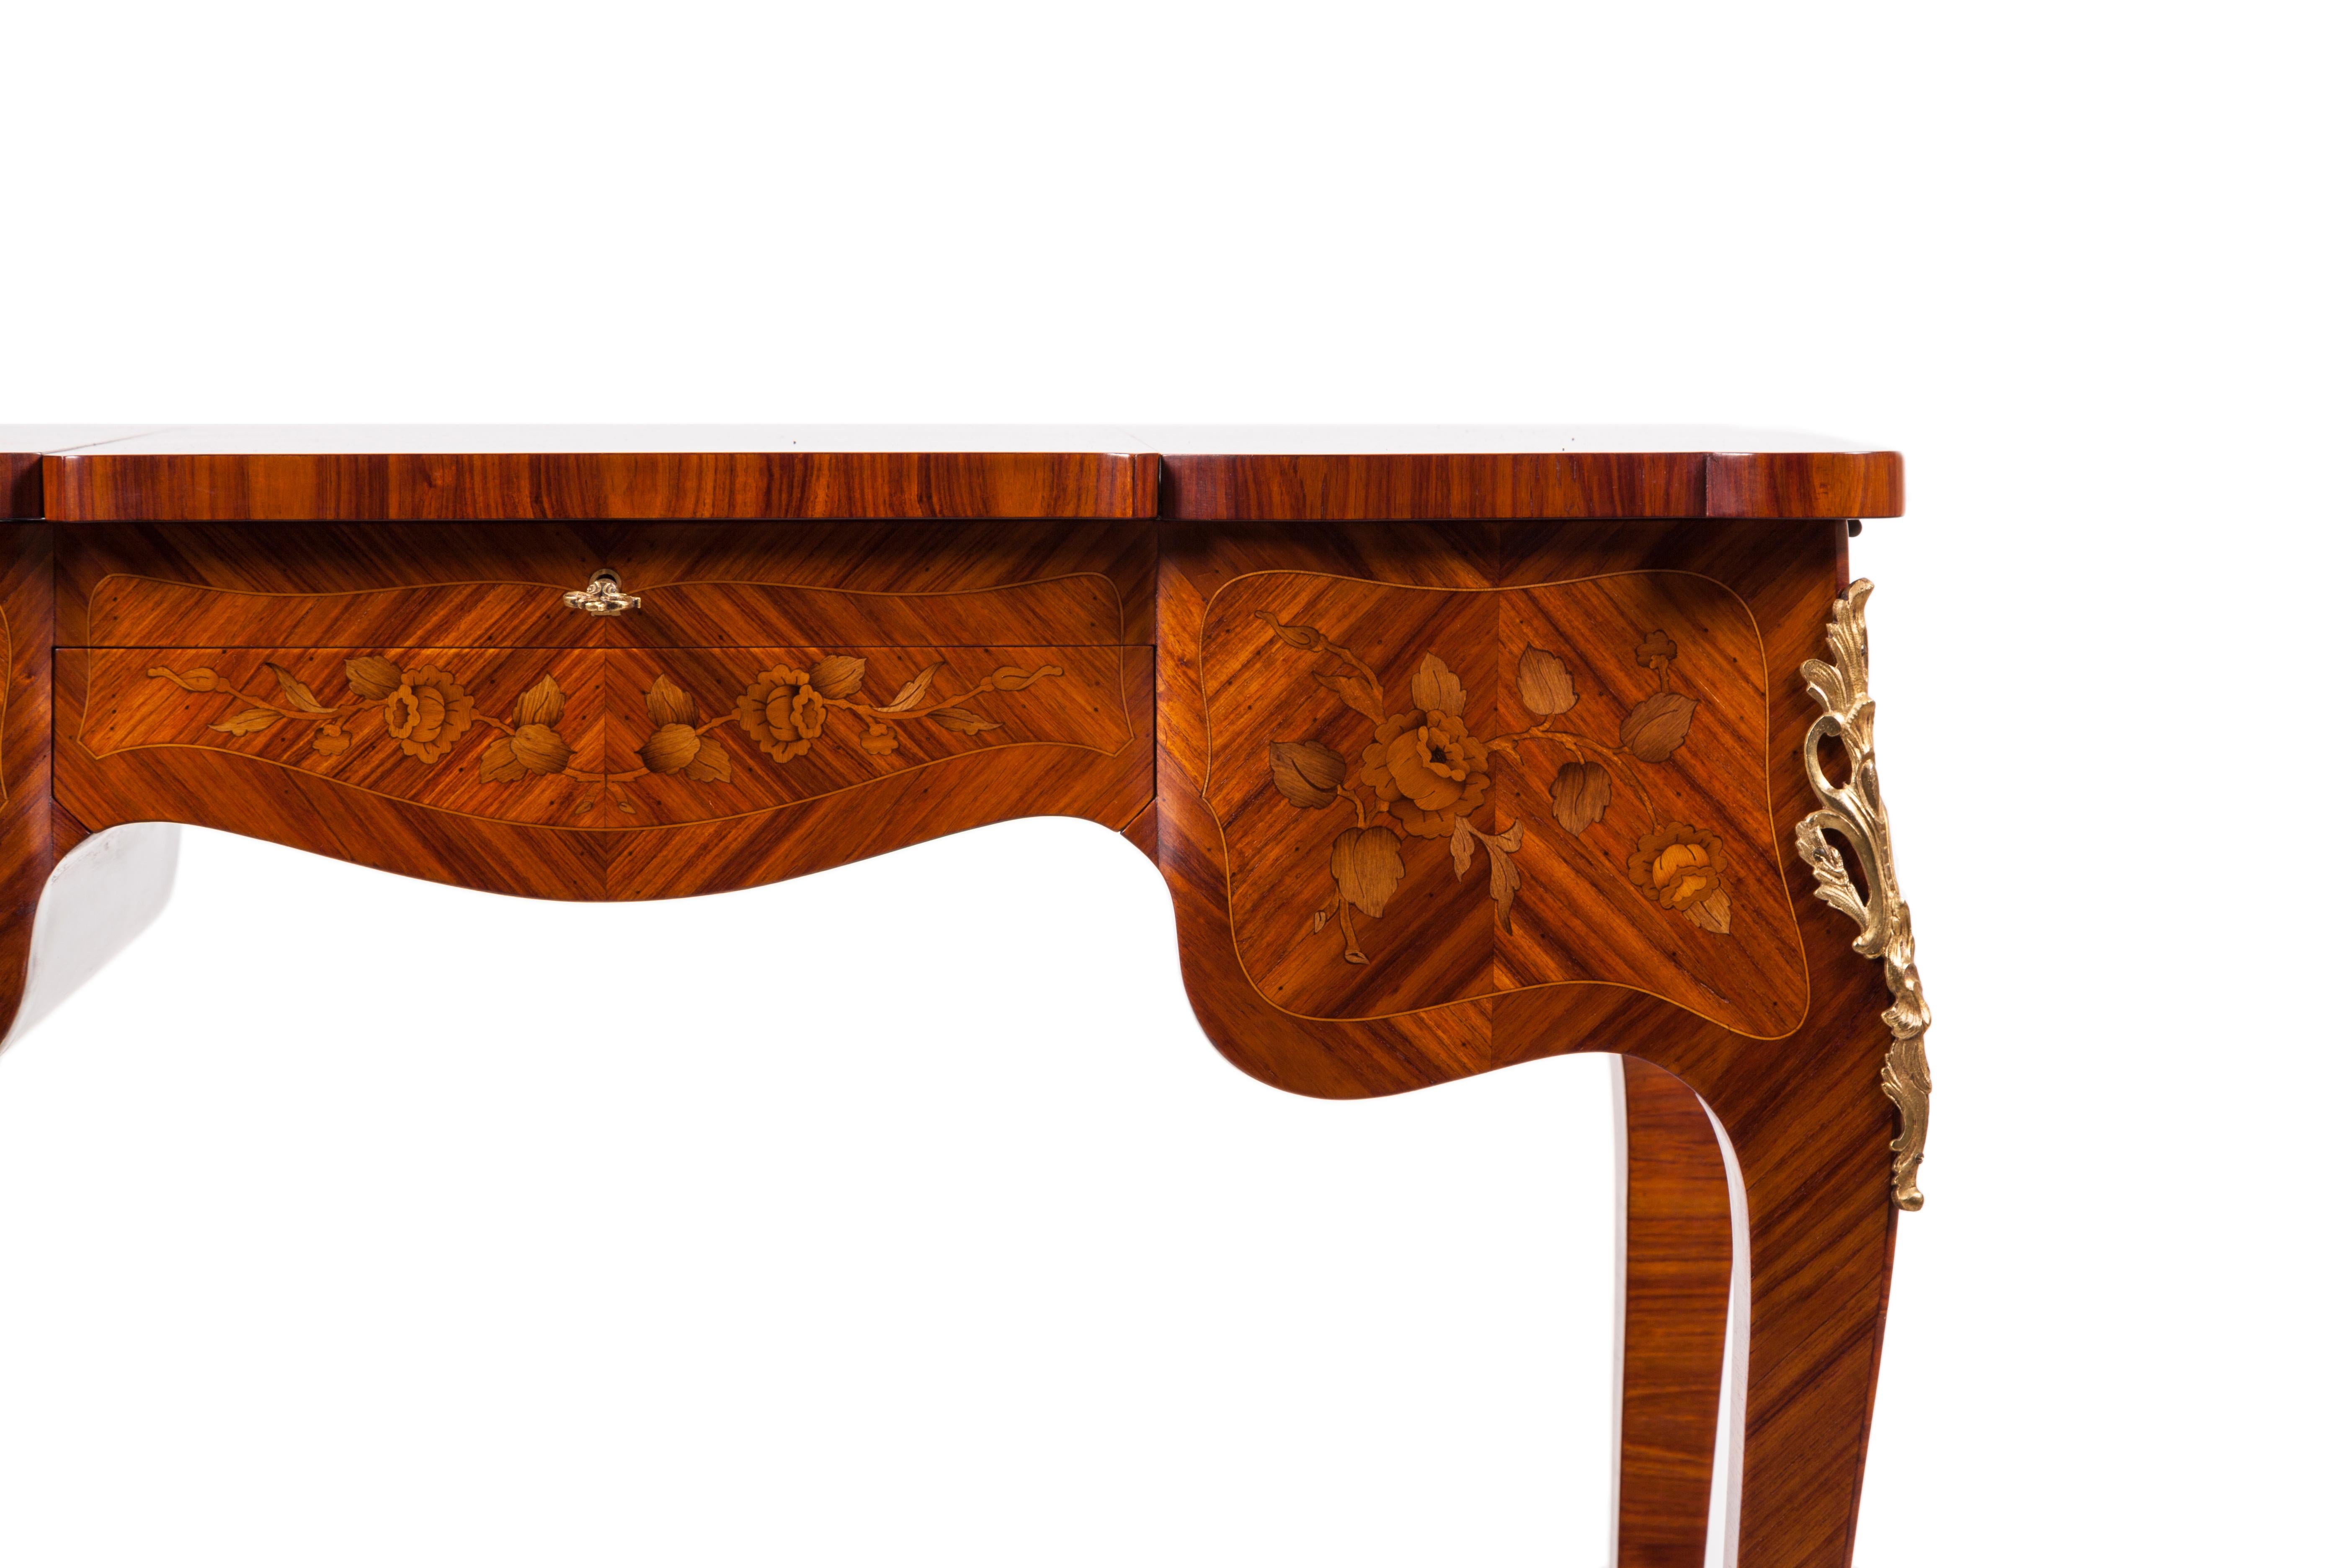 Elegant and refined dressing table (Bonheur du jour) from the mid-twentieth century.
French, in rosewood with floral inlays, typical of Louis XV style.
In perfect conditions.
Restored and finished with shellac.